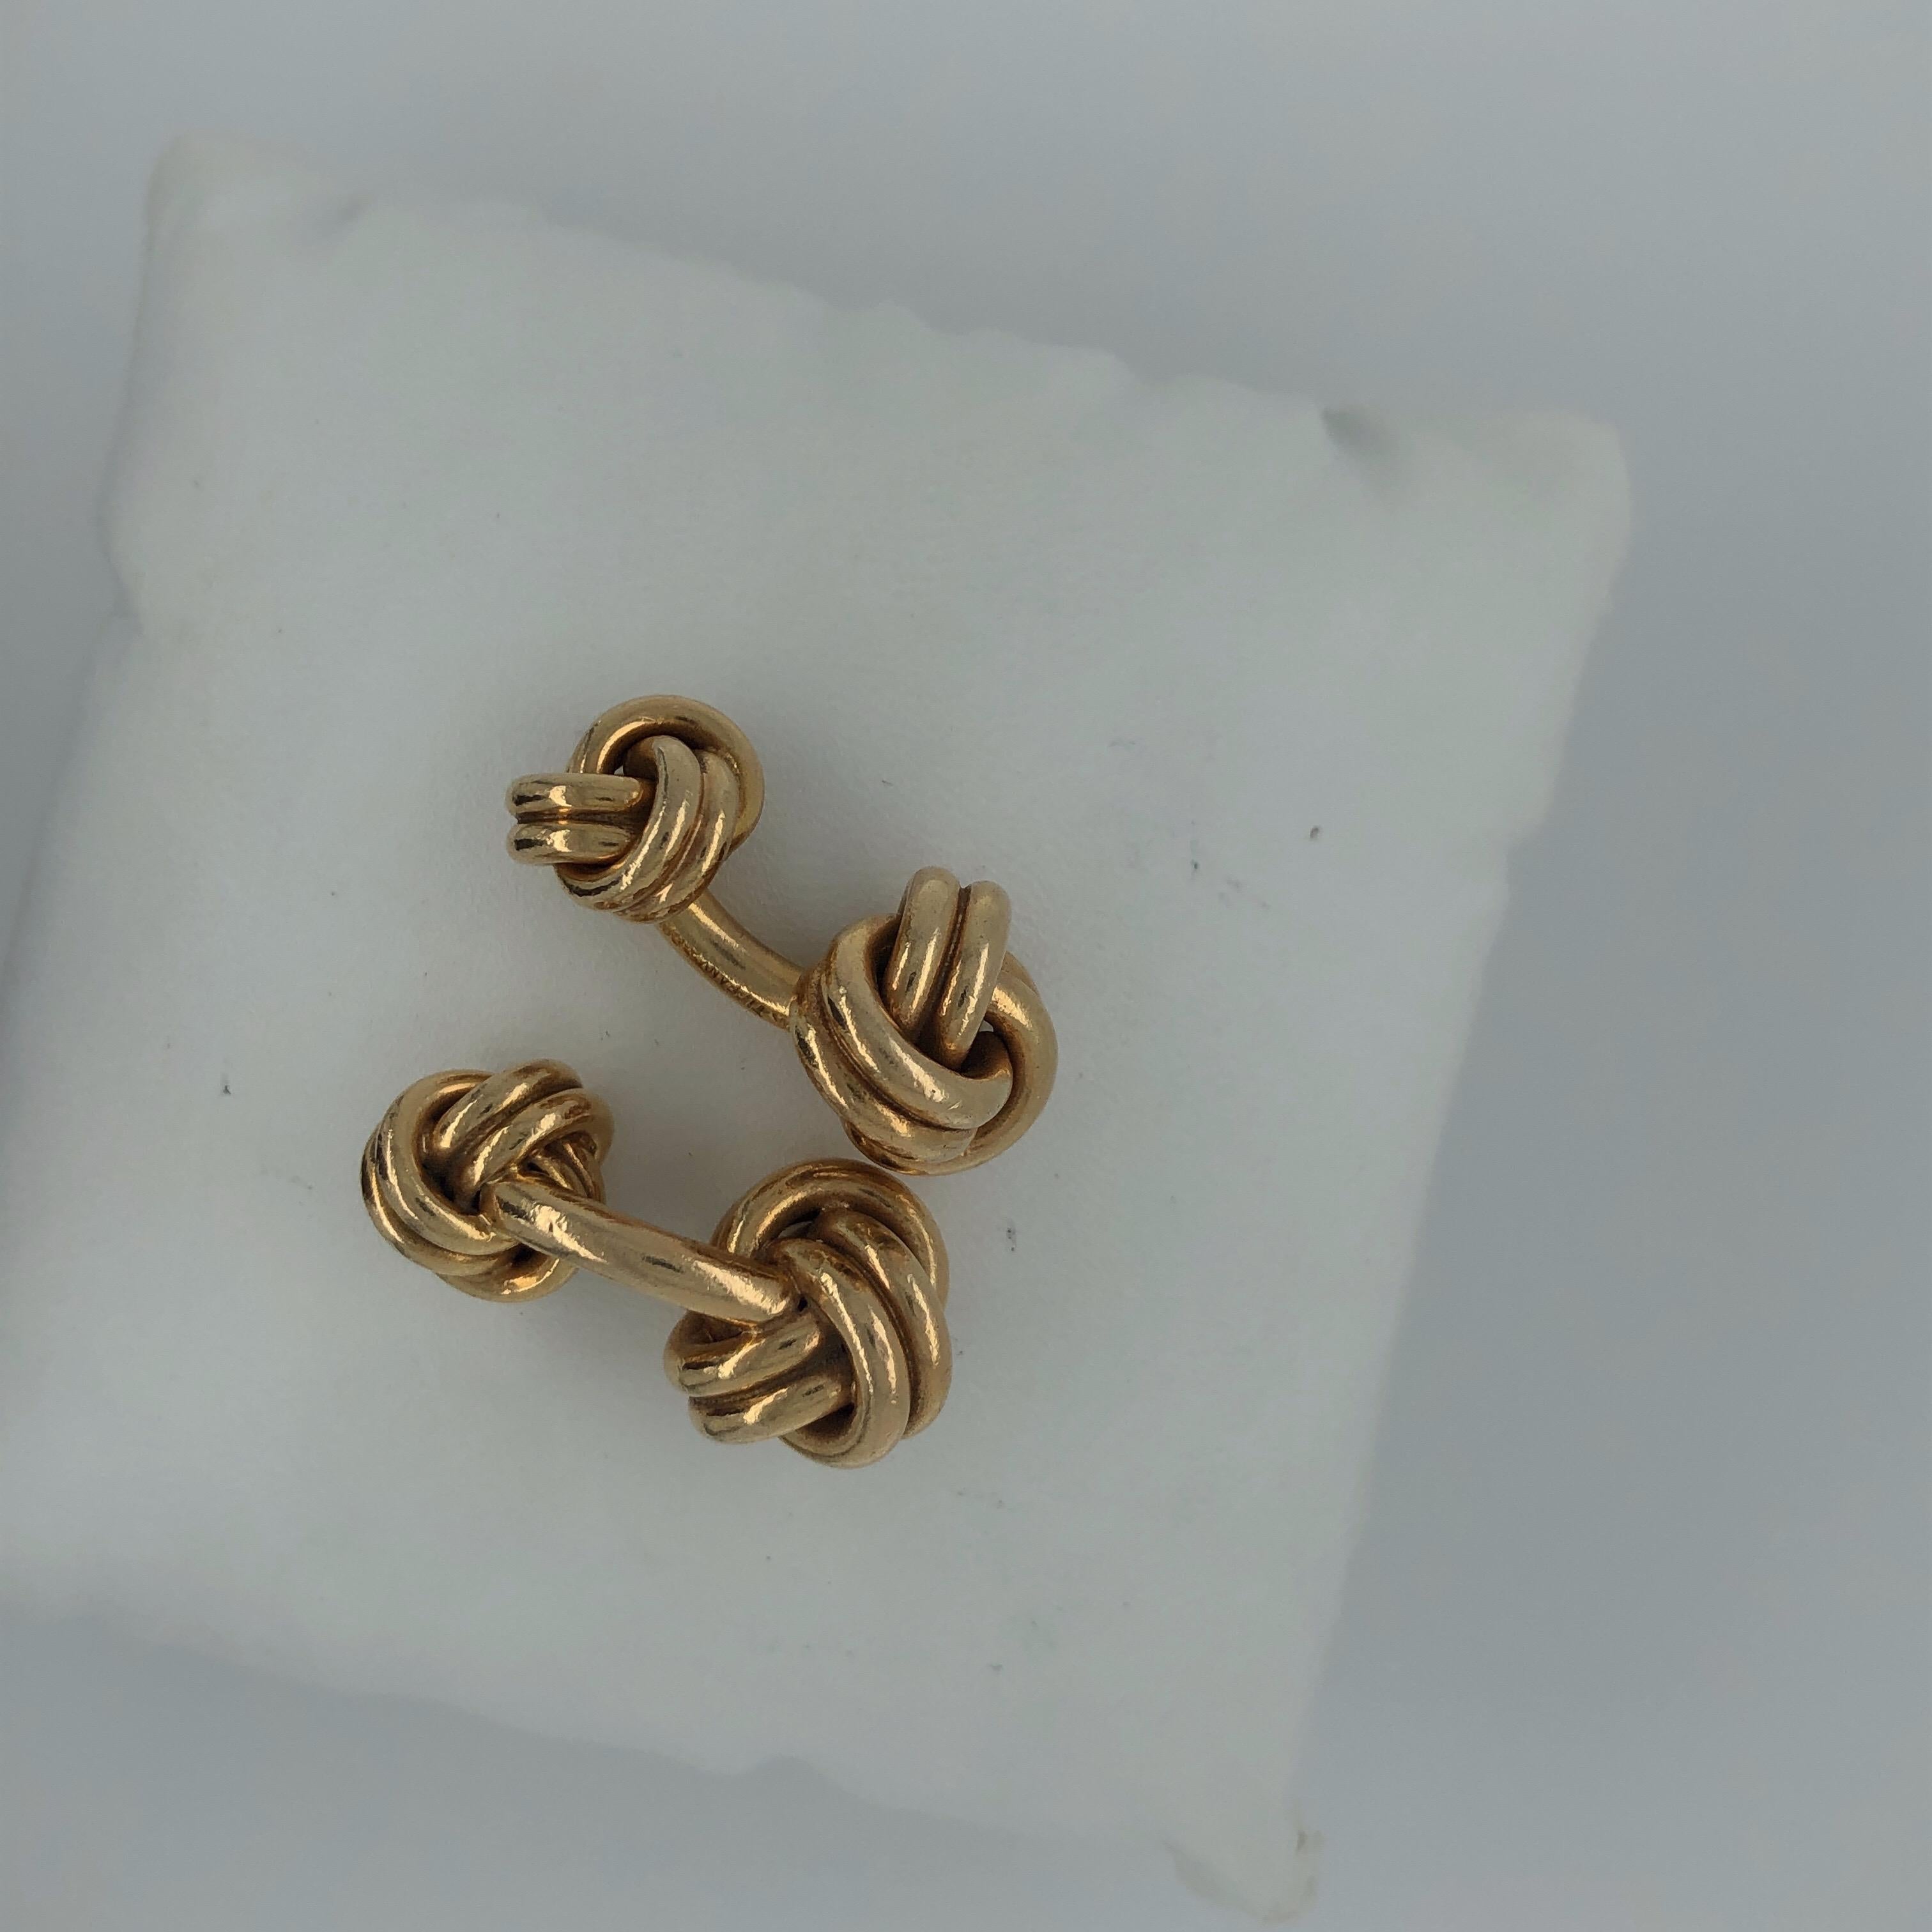 Tiffany 18K Yellow Gold Cufflinks.  Stamped Tiffany and CO.  